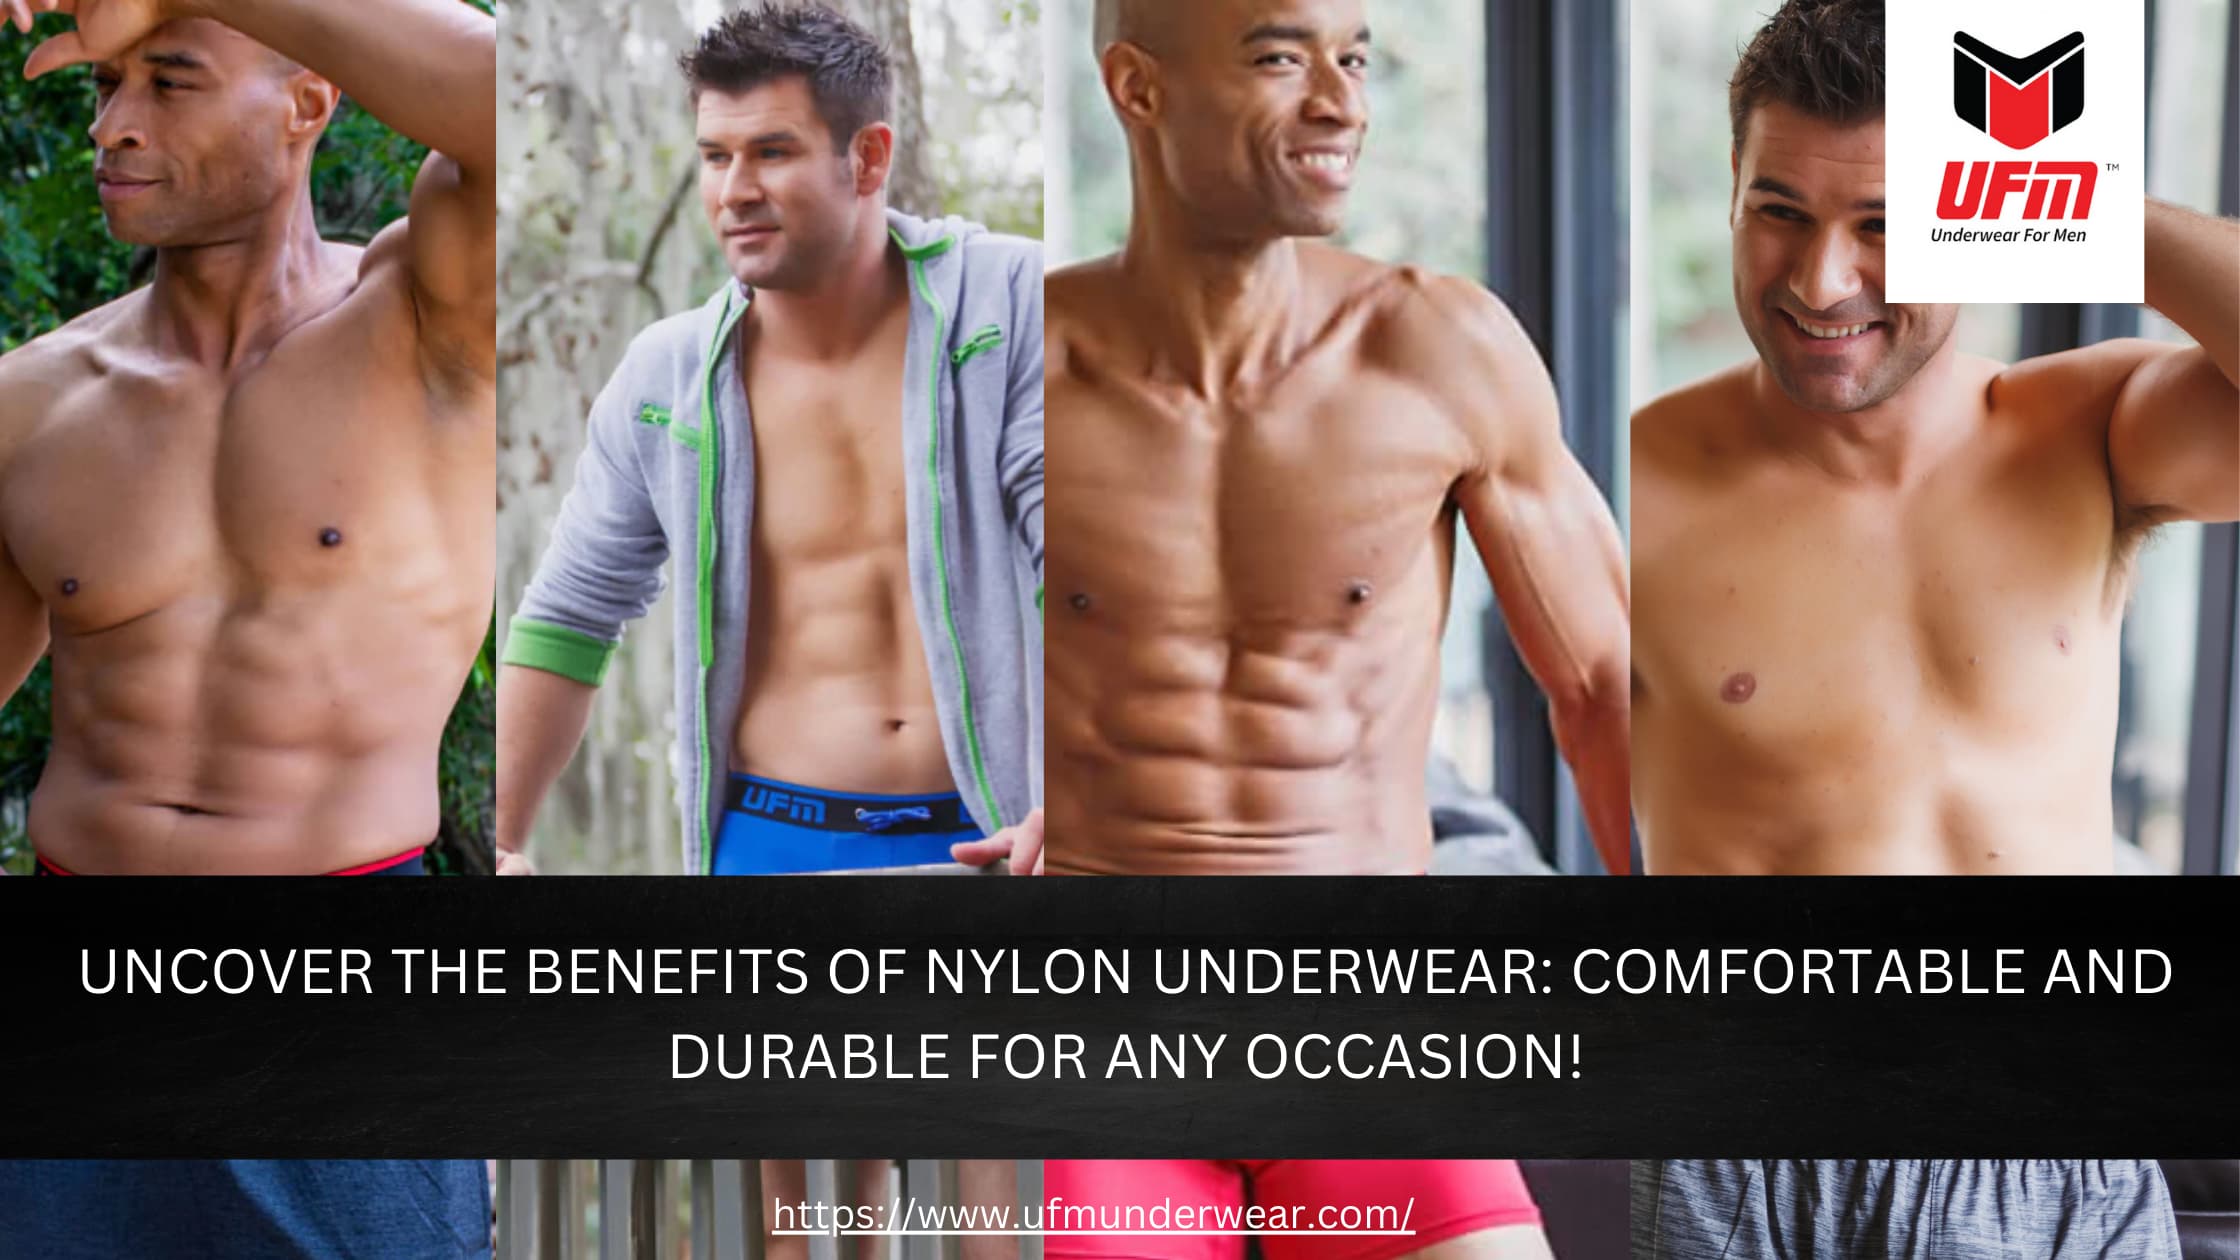 Uncover the Benefits of Nylon Underwear: Comfortable and Durable